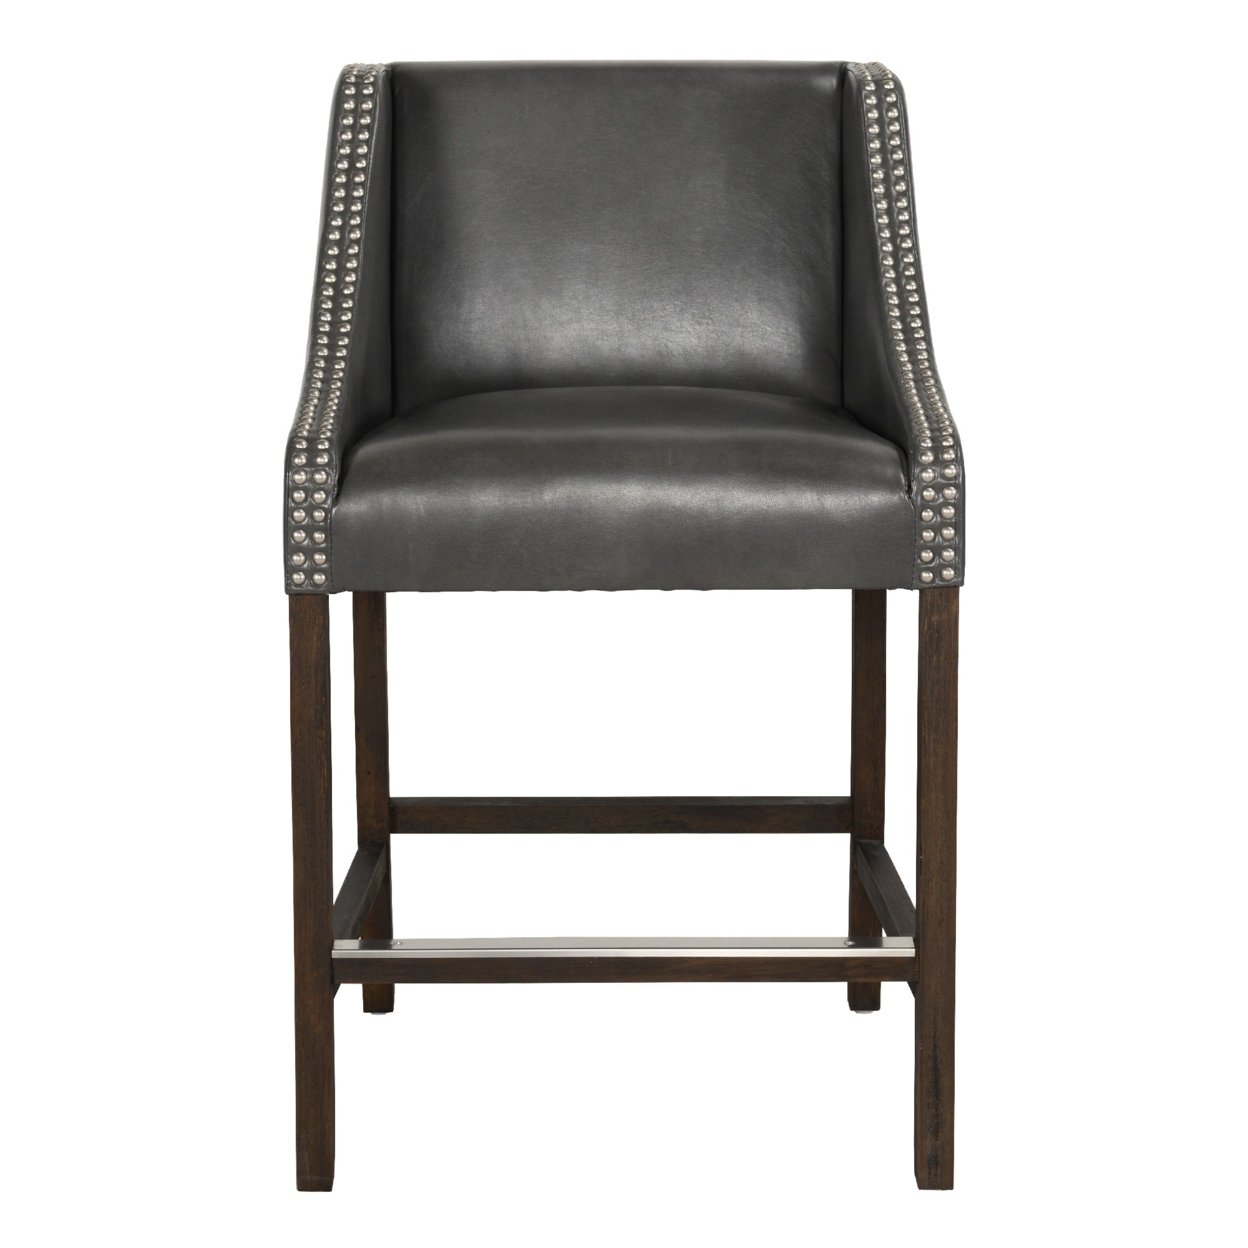 Wood And Leatherette Counter Height Stool With Swooping Arms And Nail Head Trim, Gray- Saltoro Sherpi